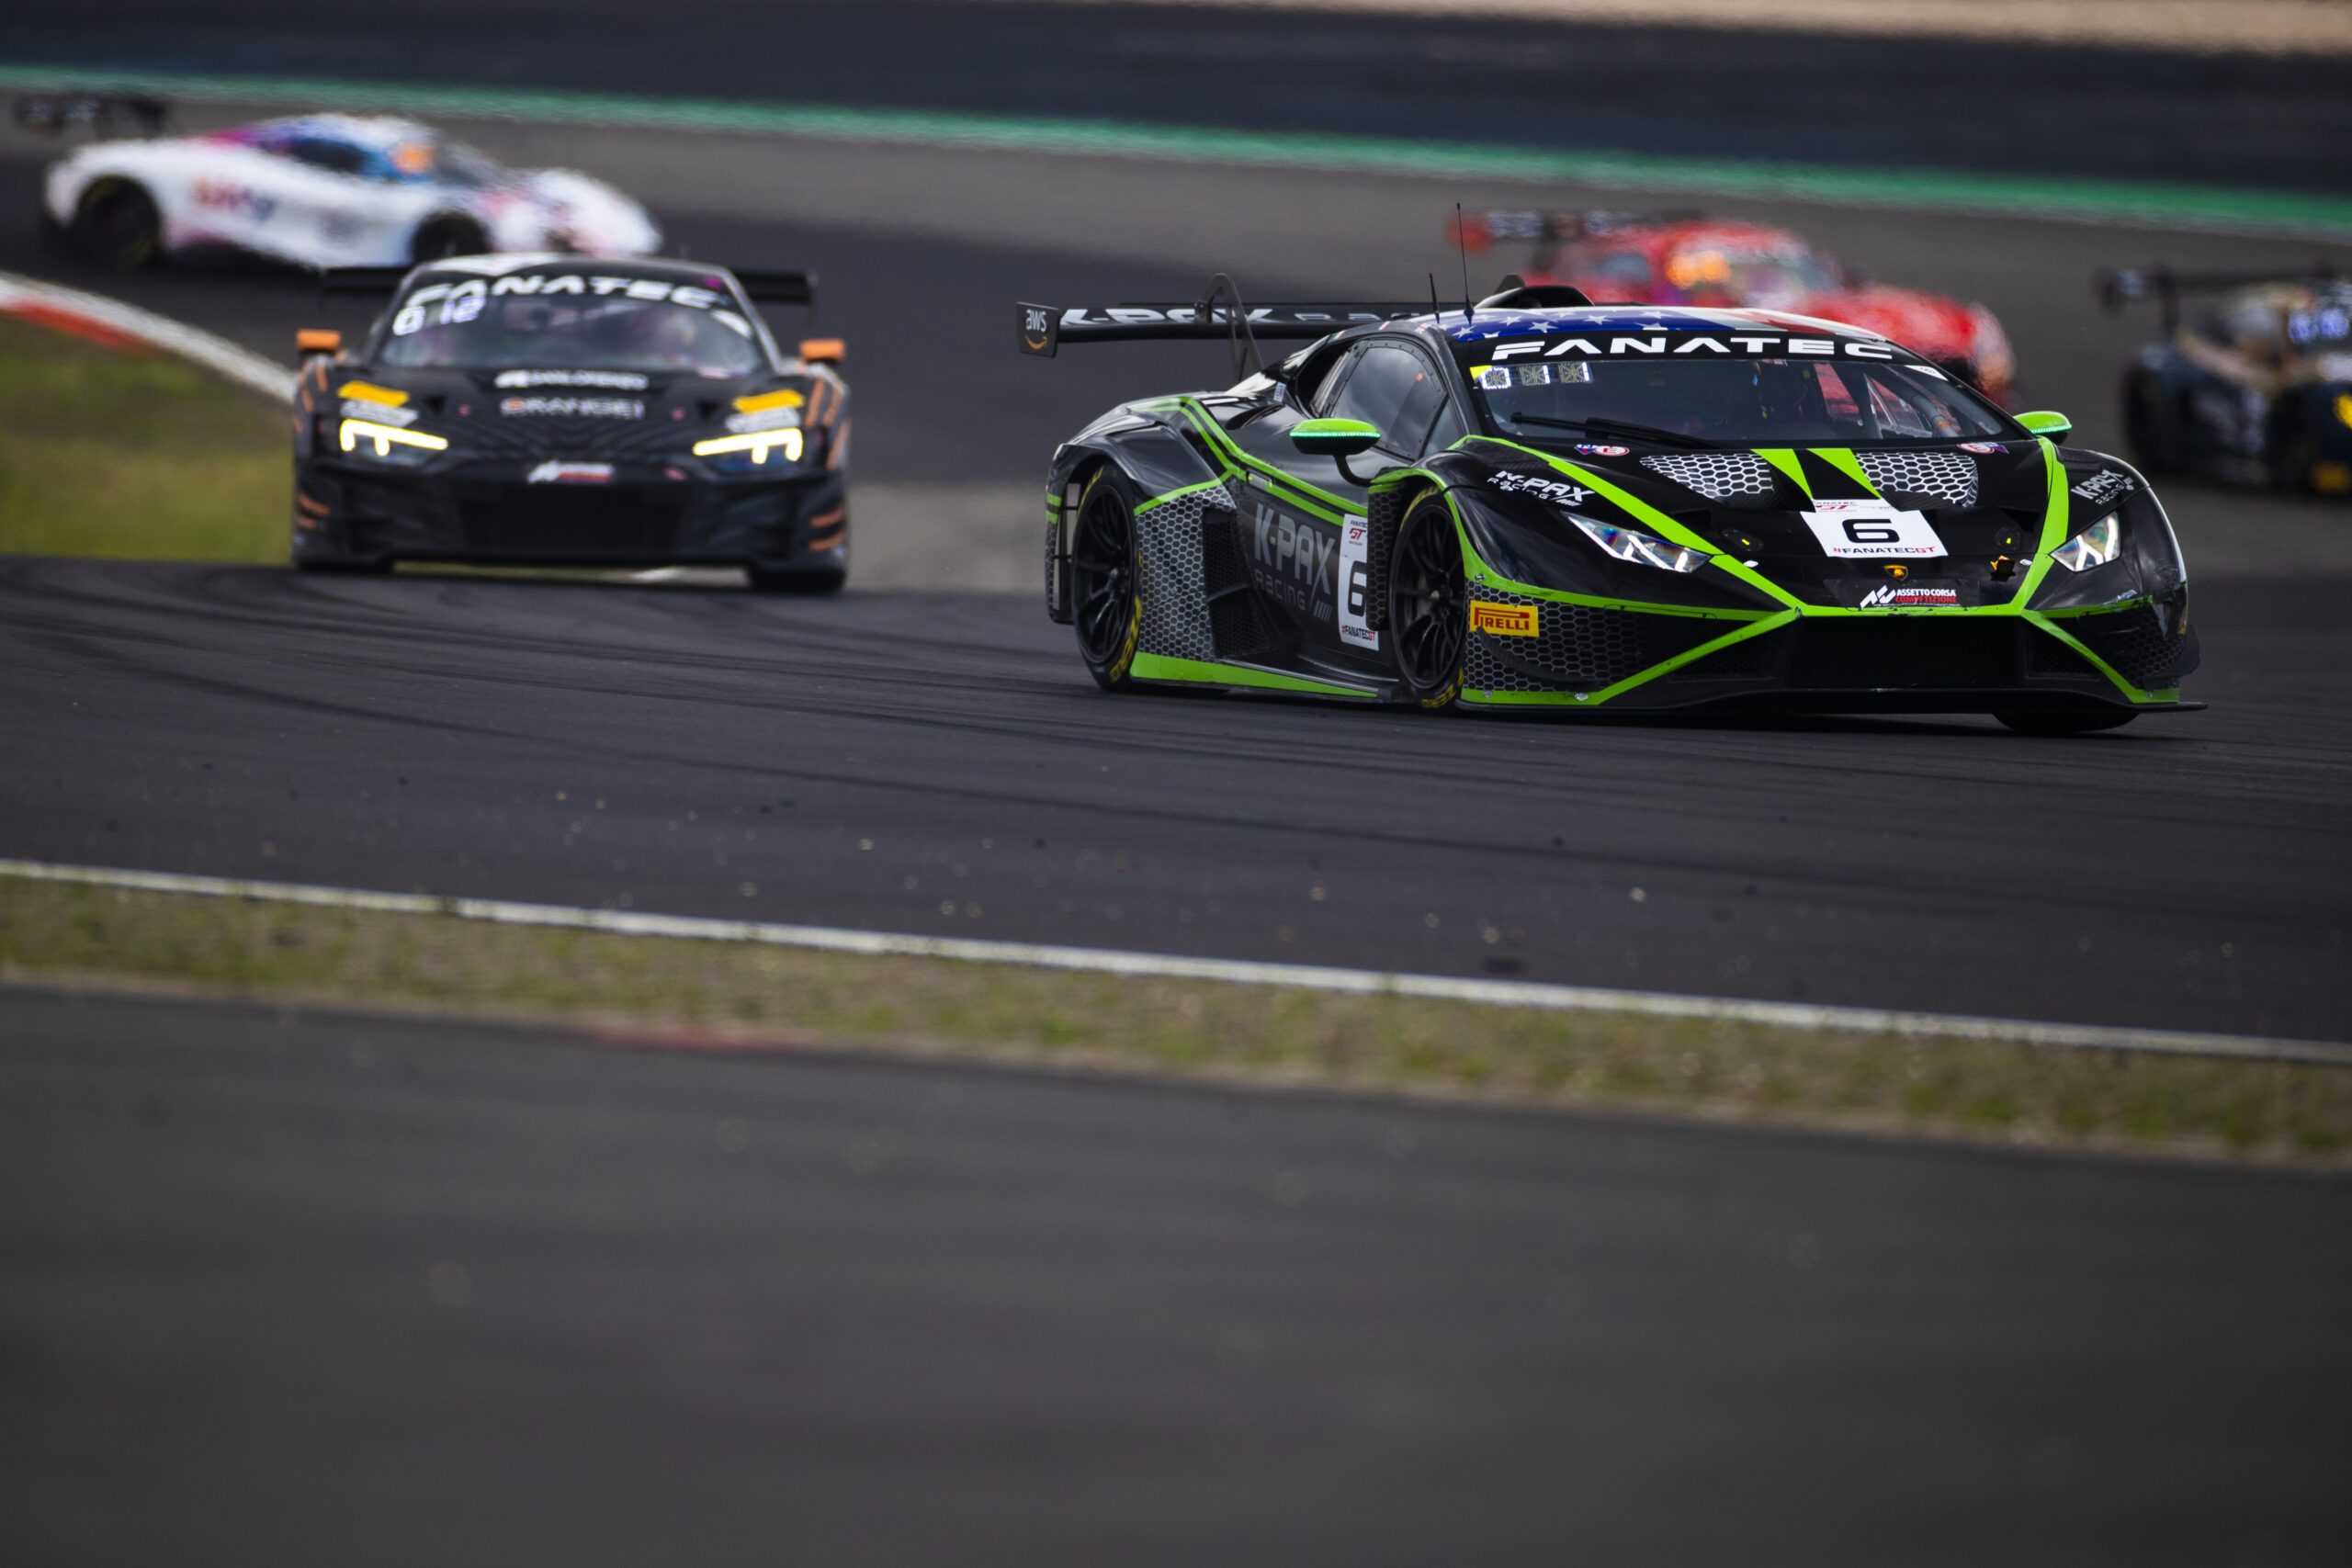 Searching for Spanish success: K-PAX Racing ready for final GT Europe charge